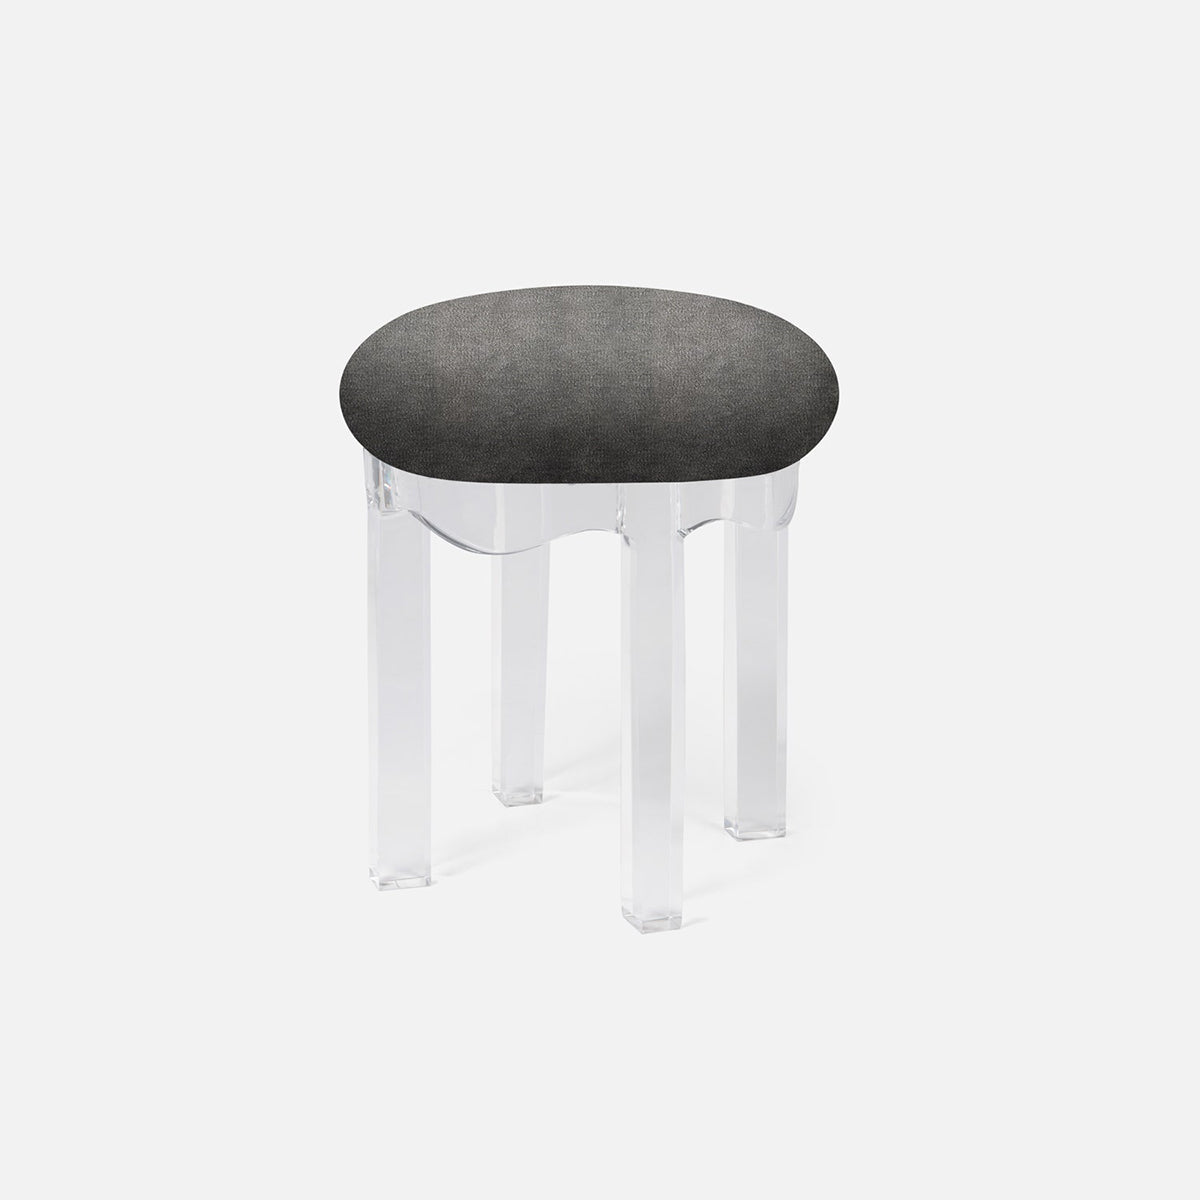 Made Goods Marston Upholstered Round Single Bench in Arno Fabric